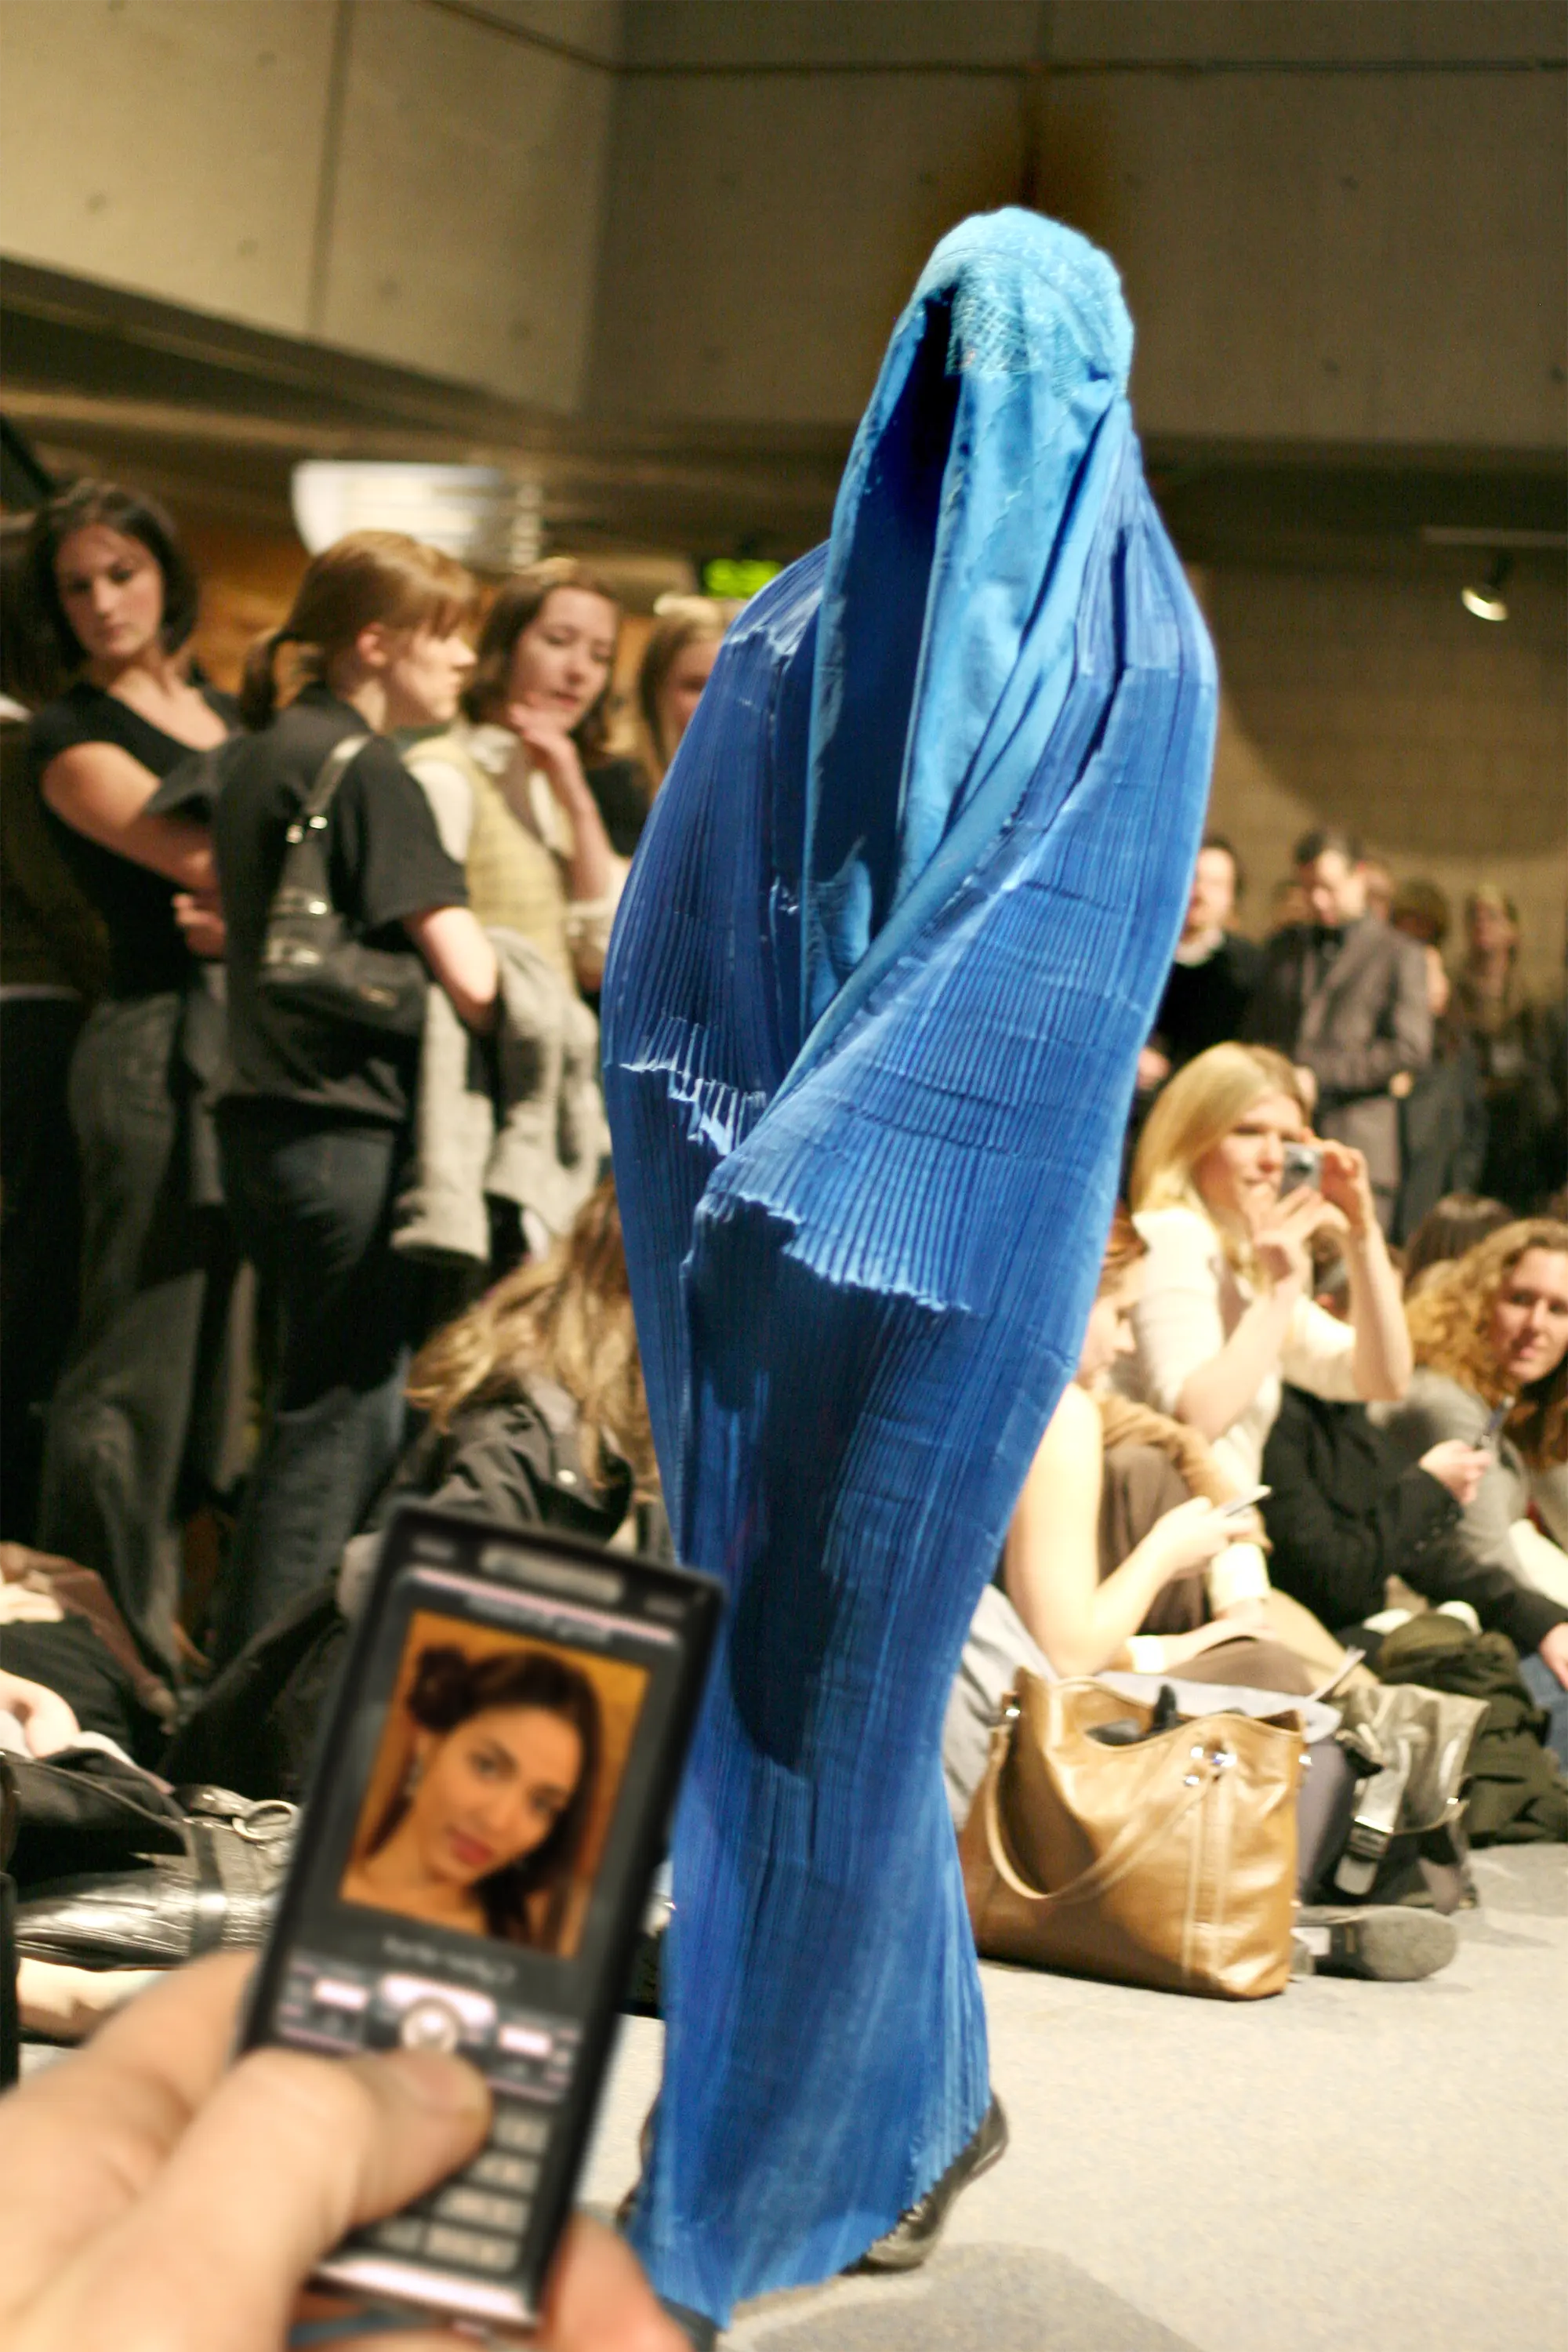 A lady in a burka during a catwalk. A mobile phone displays the face of the lady in the burka.